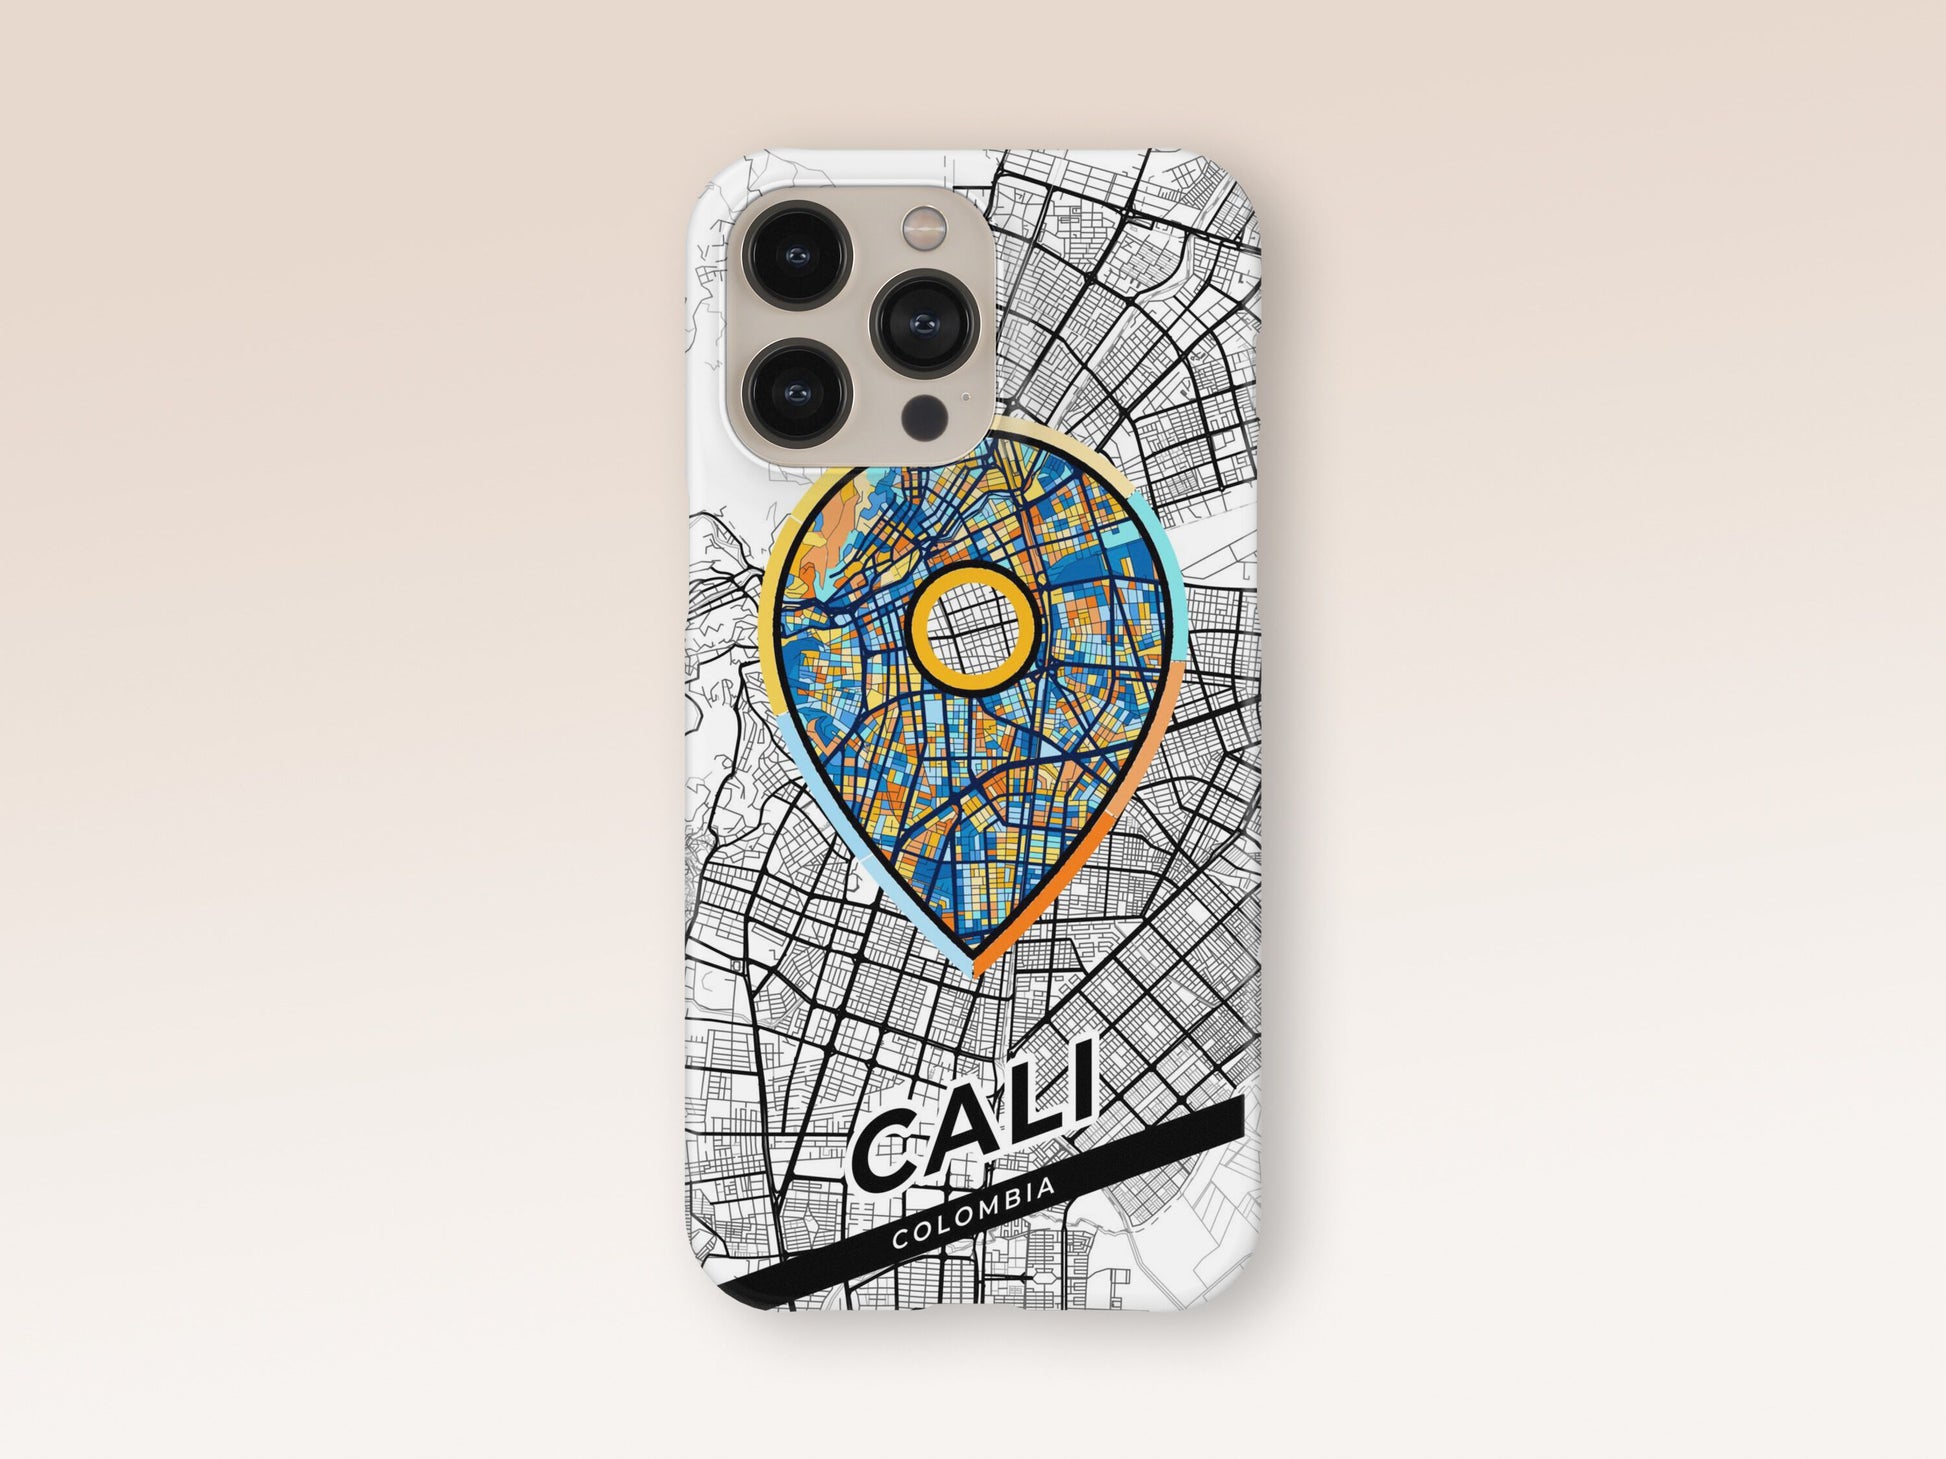 Cali Colombia slim phone case with colorful icon. Birthday, wedding or housewarming gift. Couple match cases. 1